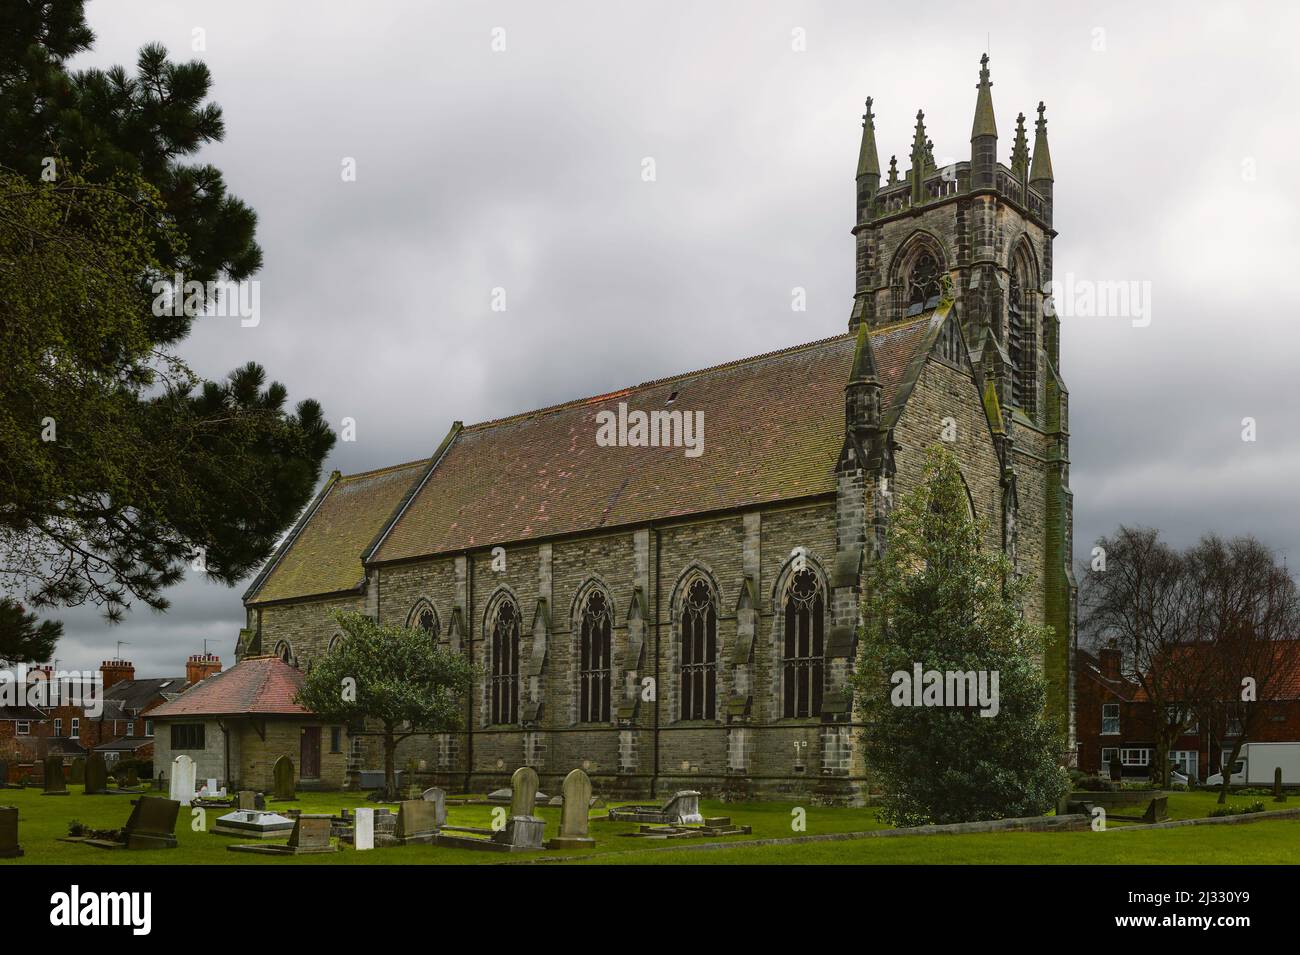 St Nicholas Church with view of gravestones and flanked by lawns and trees under cloudy sky on a spring morninbg in Beverley, Yorkshire, UK. Stock Photo